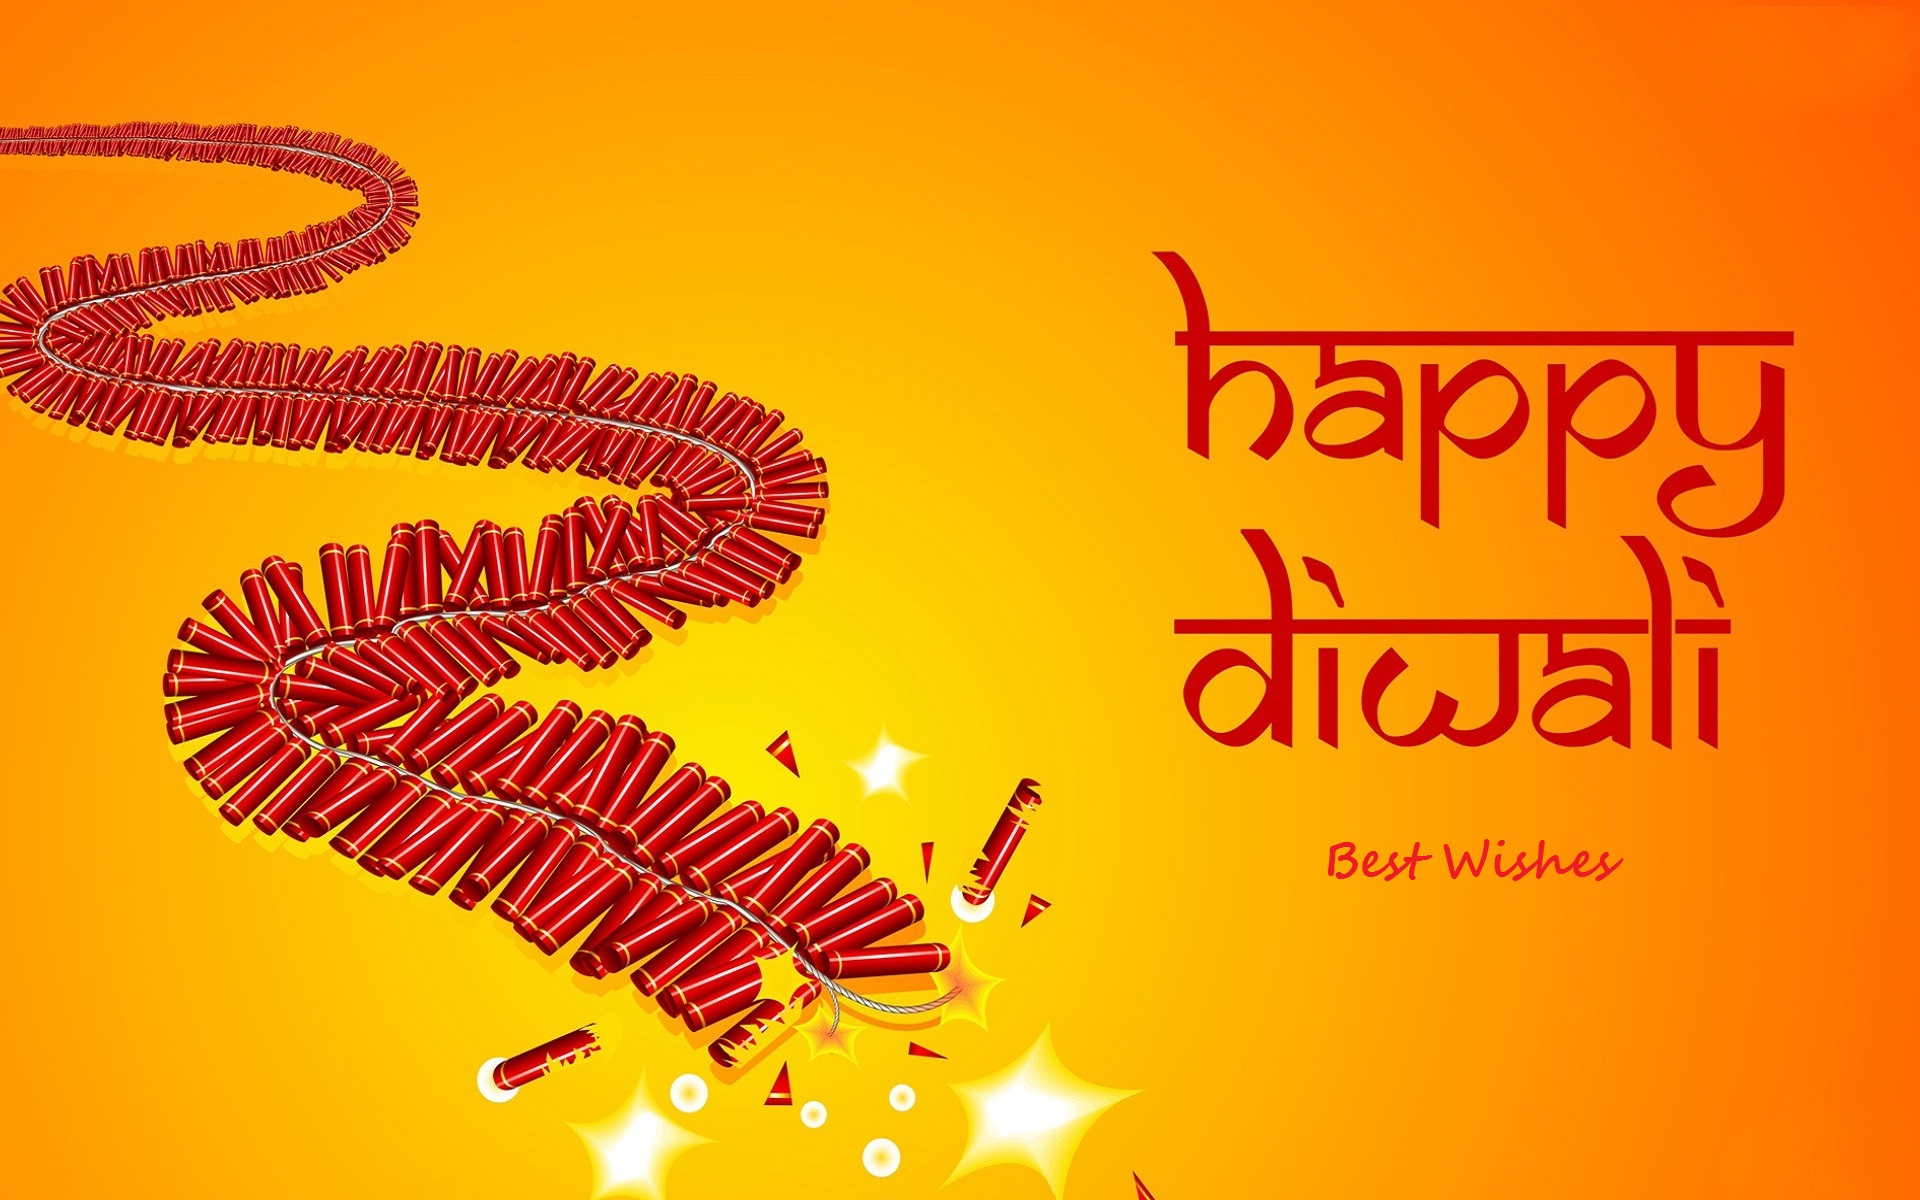 Happy Diwali Hd Images, Wallpapers, Picture & Photos - Happy Diwali In  Advance - 1920x1200 Wallpaper 